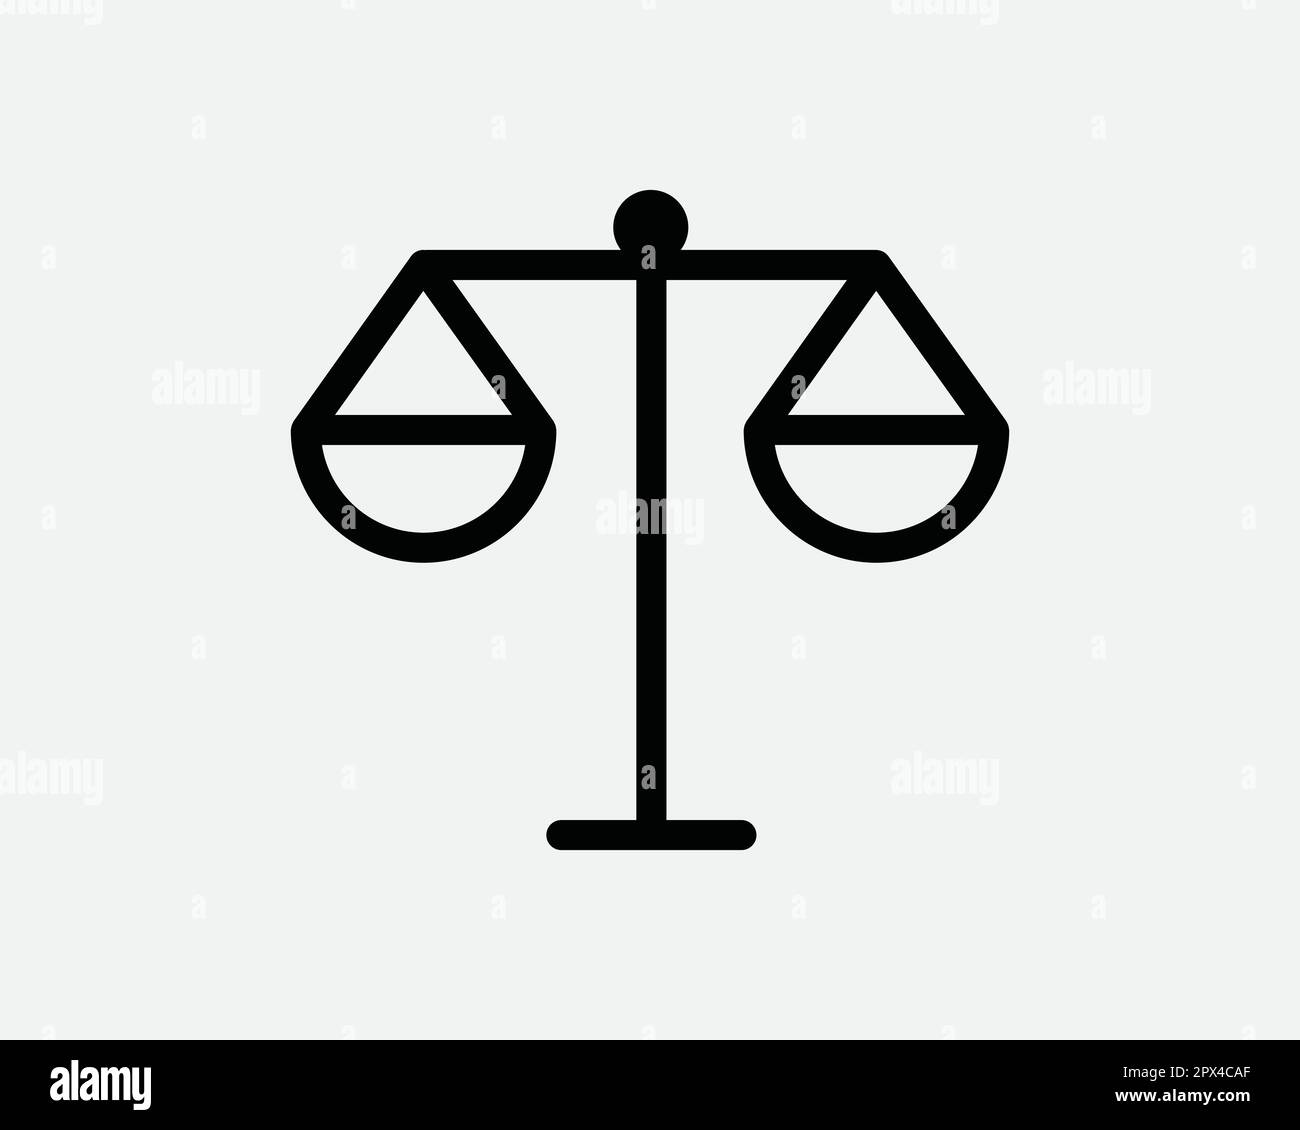 Ethics Equality Equal Scale Balance Justice Law Legal integrity Black and White Icon Sign Symbol Vector Artwork Clipart Illustration Stock Vector